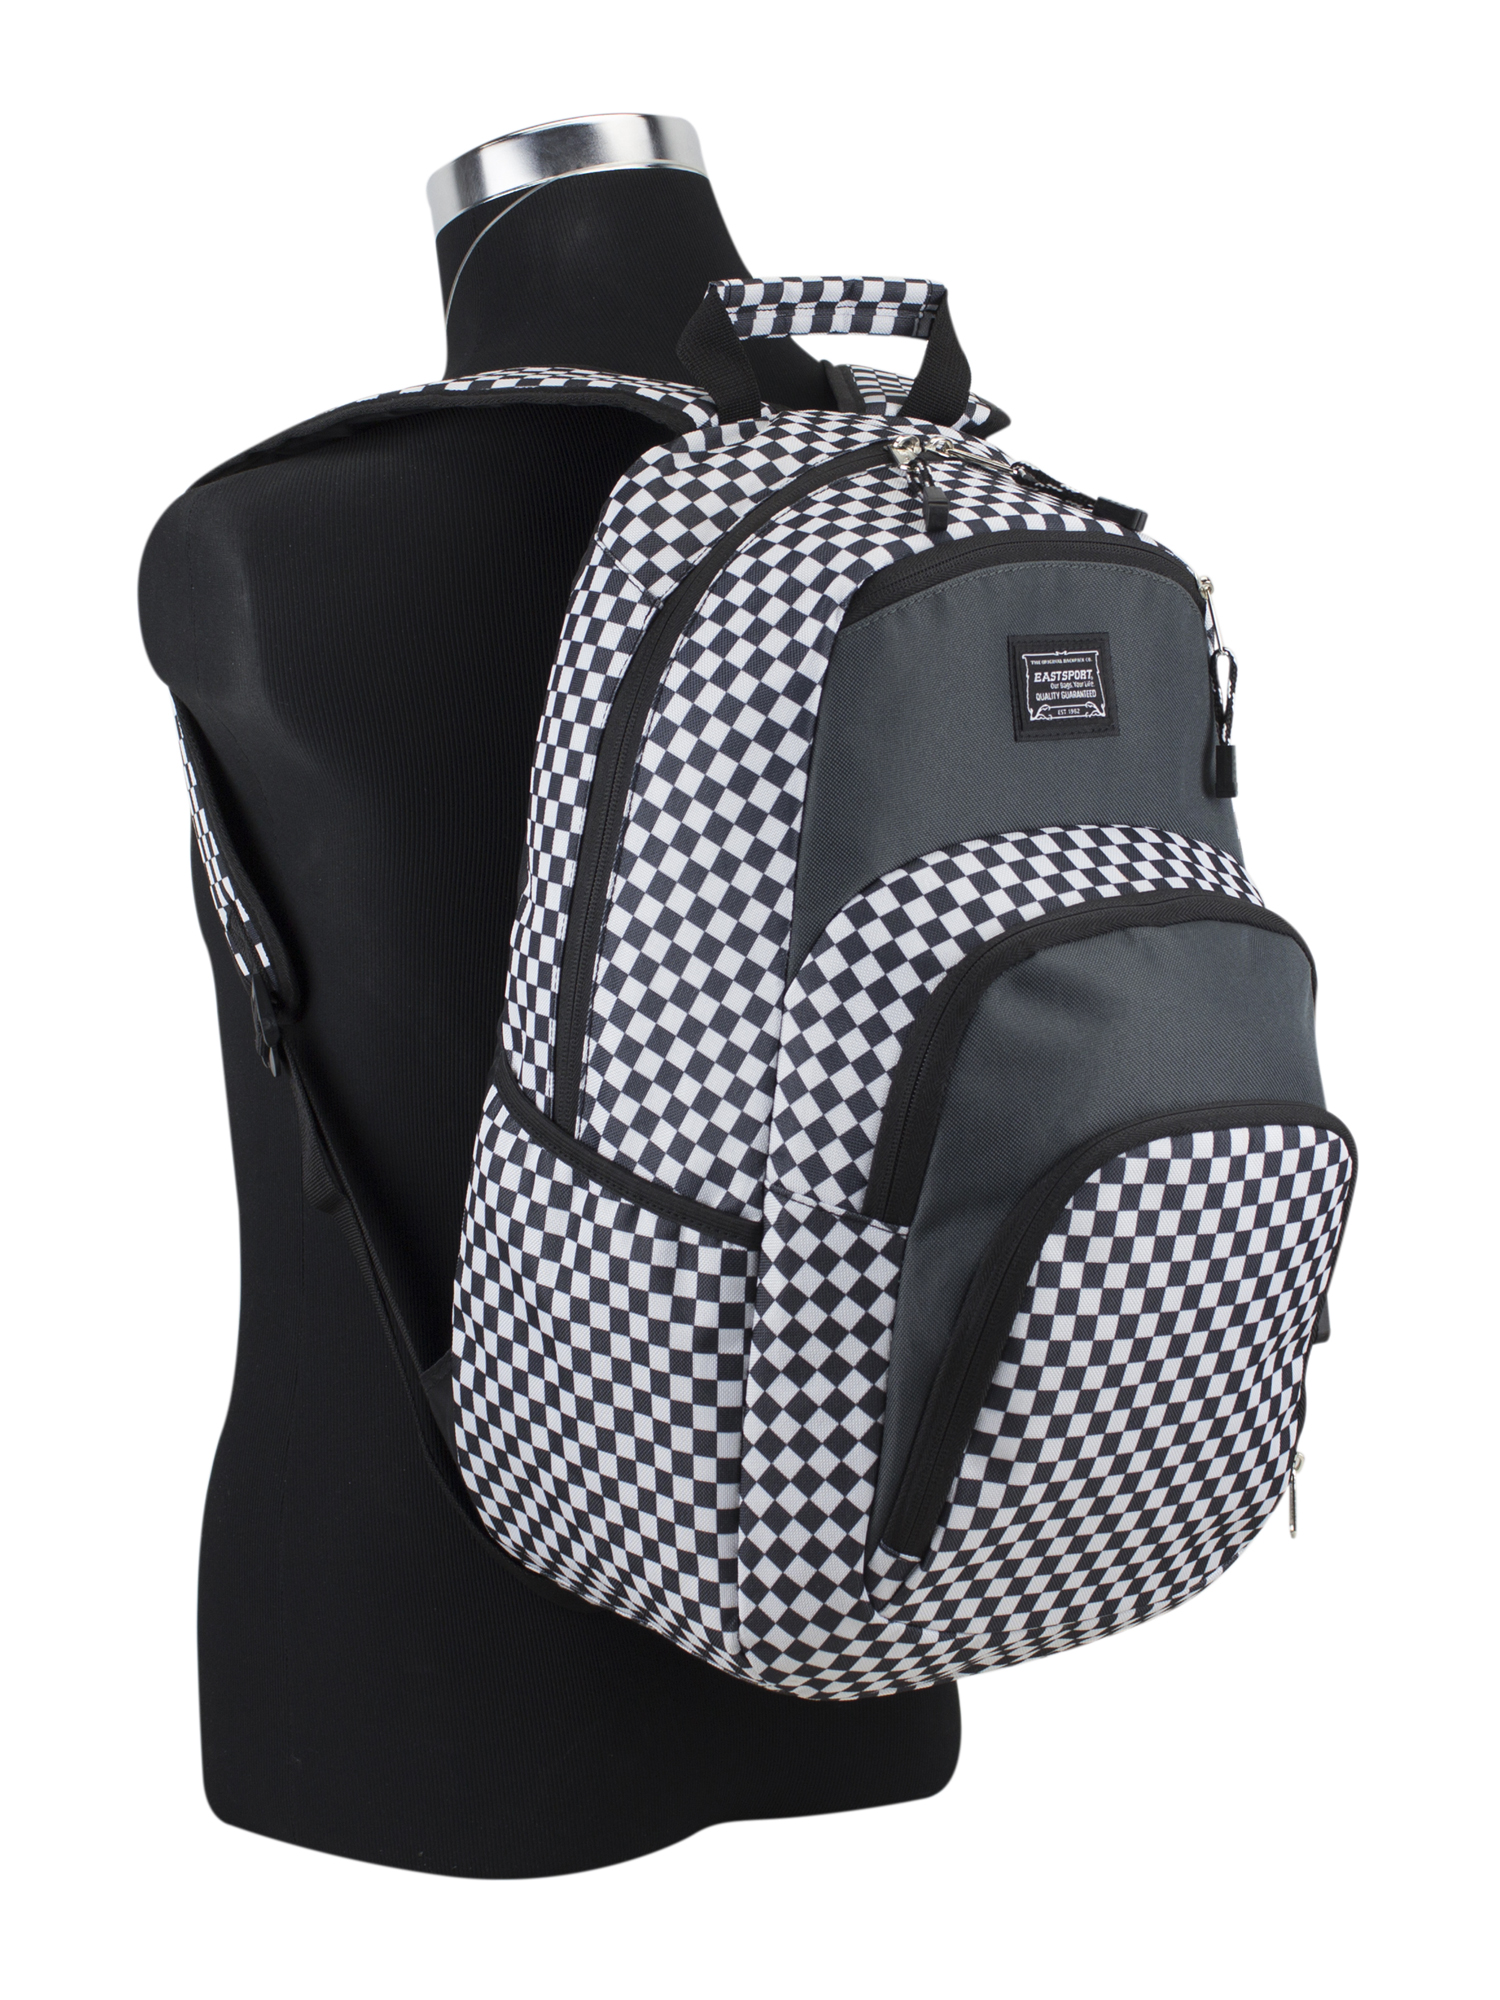 Eastsport Sport Tier Athleisure Checker Plaid Backpack with Adjustable Straps - image 5 of 7